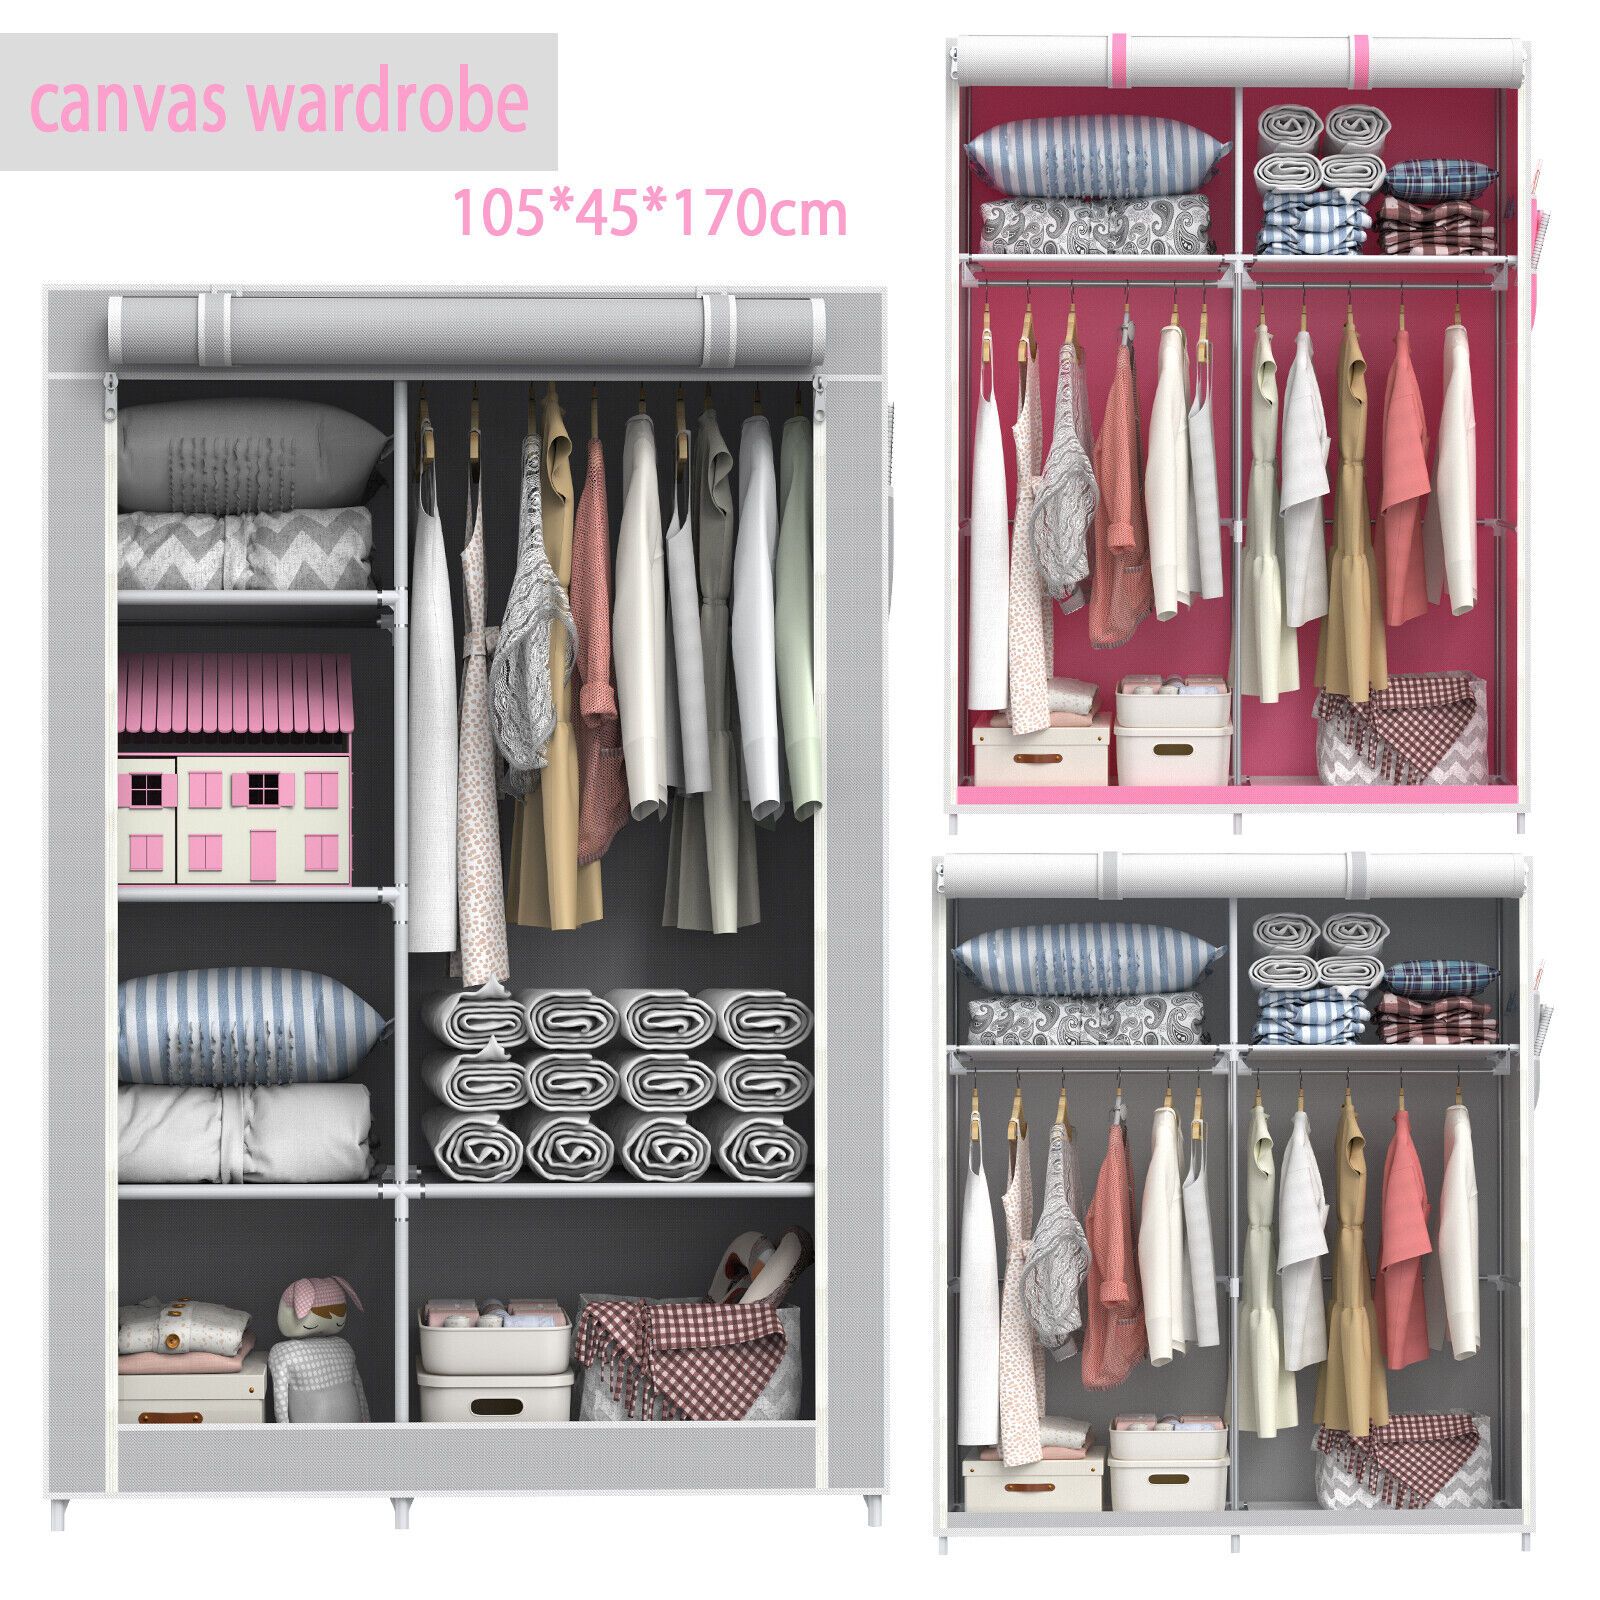 Double Fabric Canvas Wardrobe With Clothes Hanging Rail Storage Shelves  Cupboard | Ebay Throughout Tall Double Hanging Rail Wardrobes (View 10 of 15)